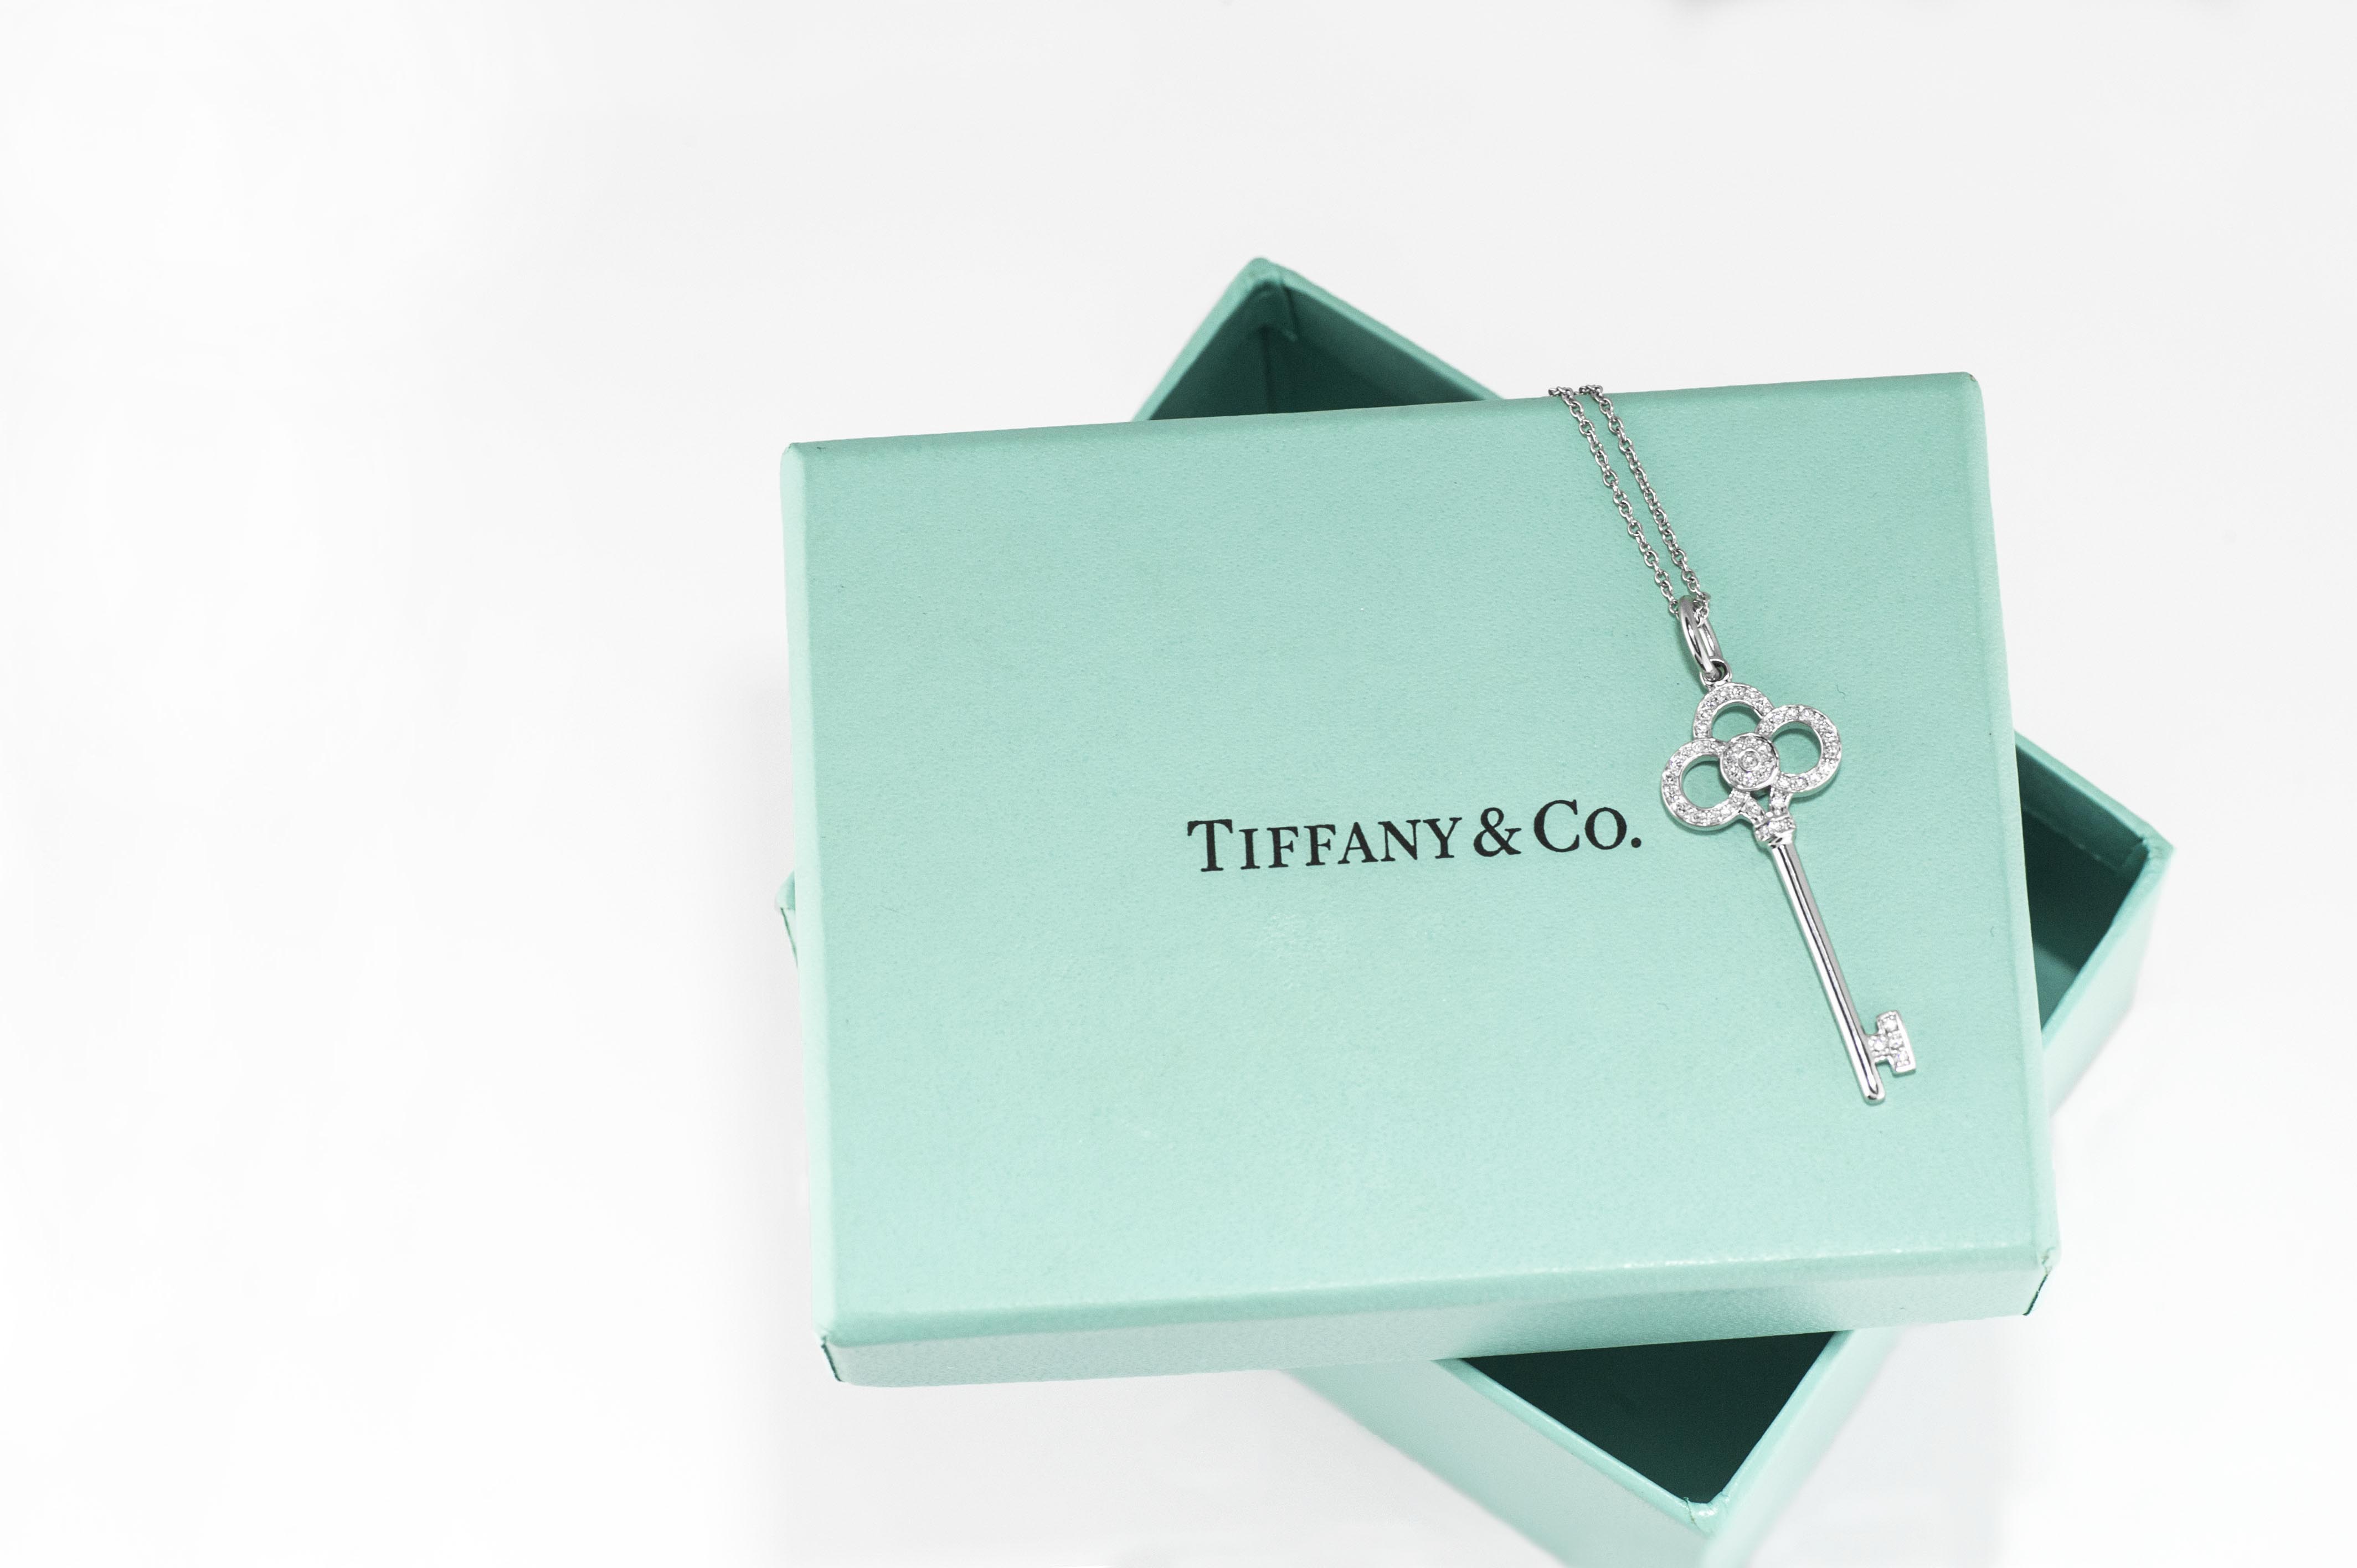 Tiffany & Co.: 10 Fascinating Facts You Never Knew - Leo Hamel